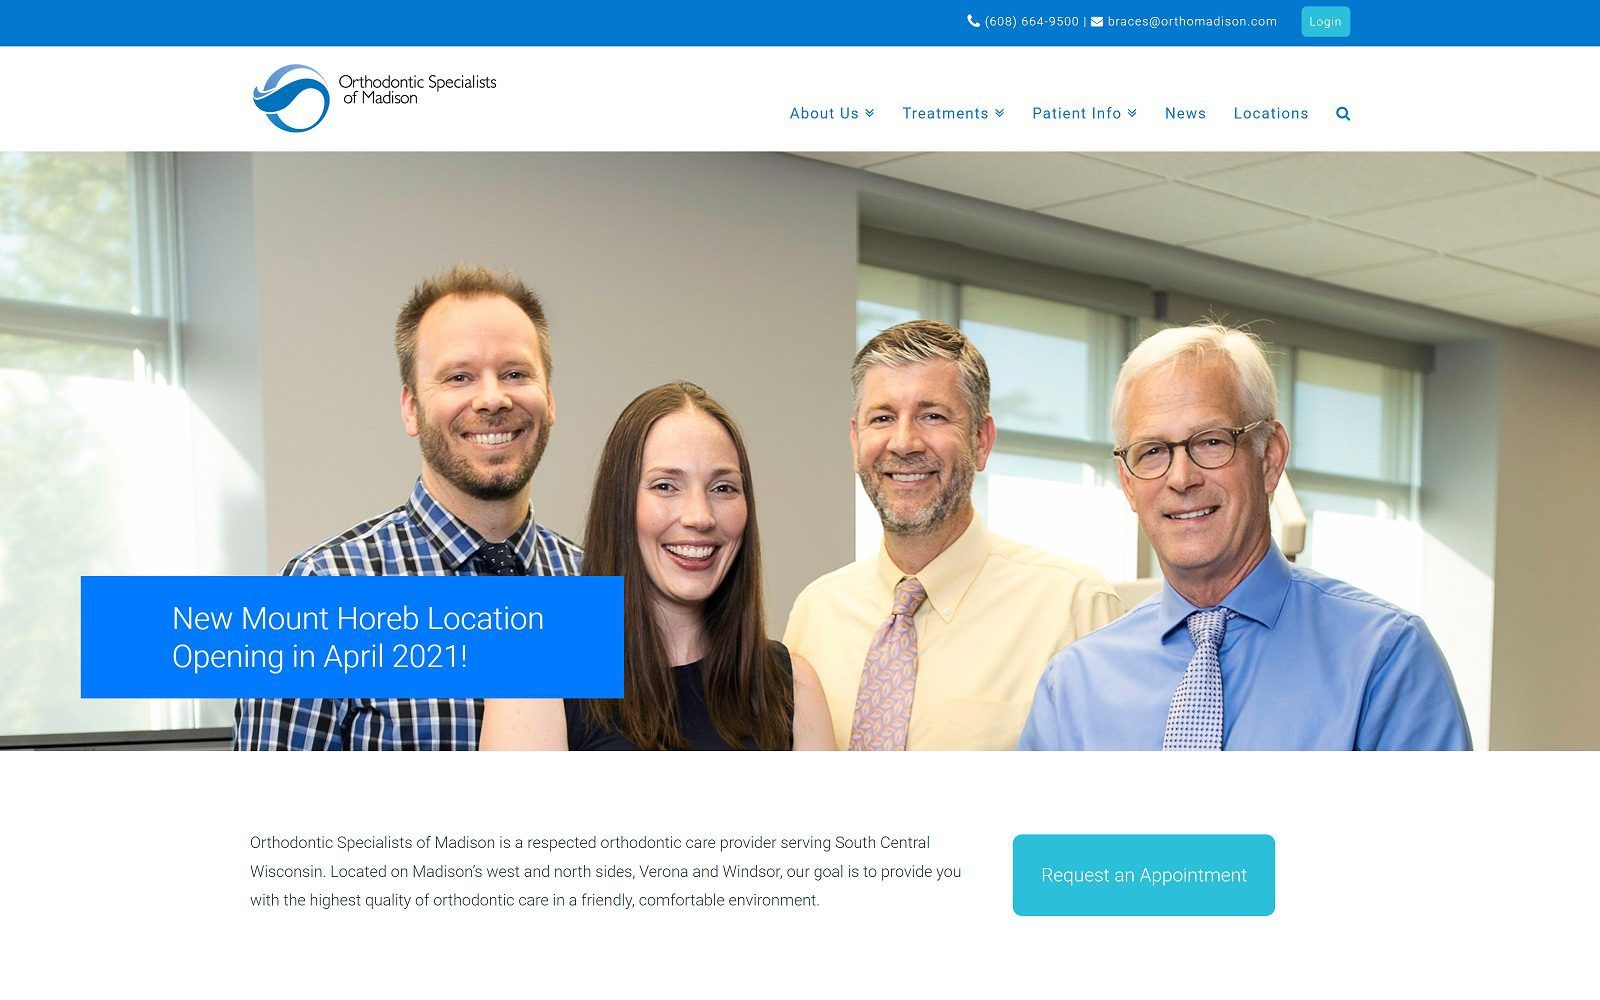 The screenshot of orthodontic specialists of madison website